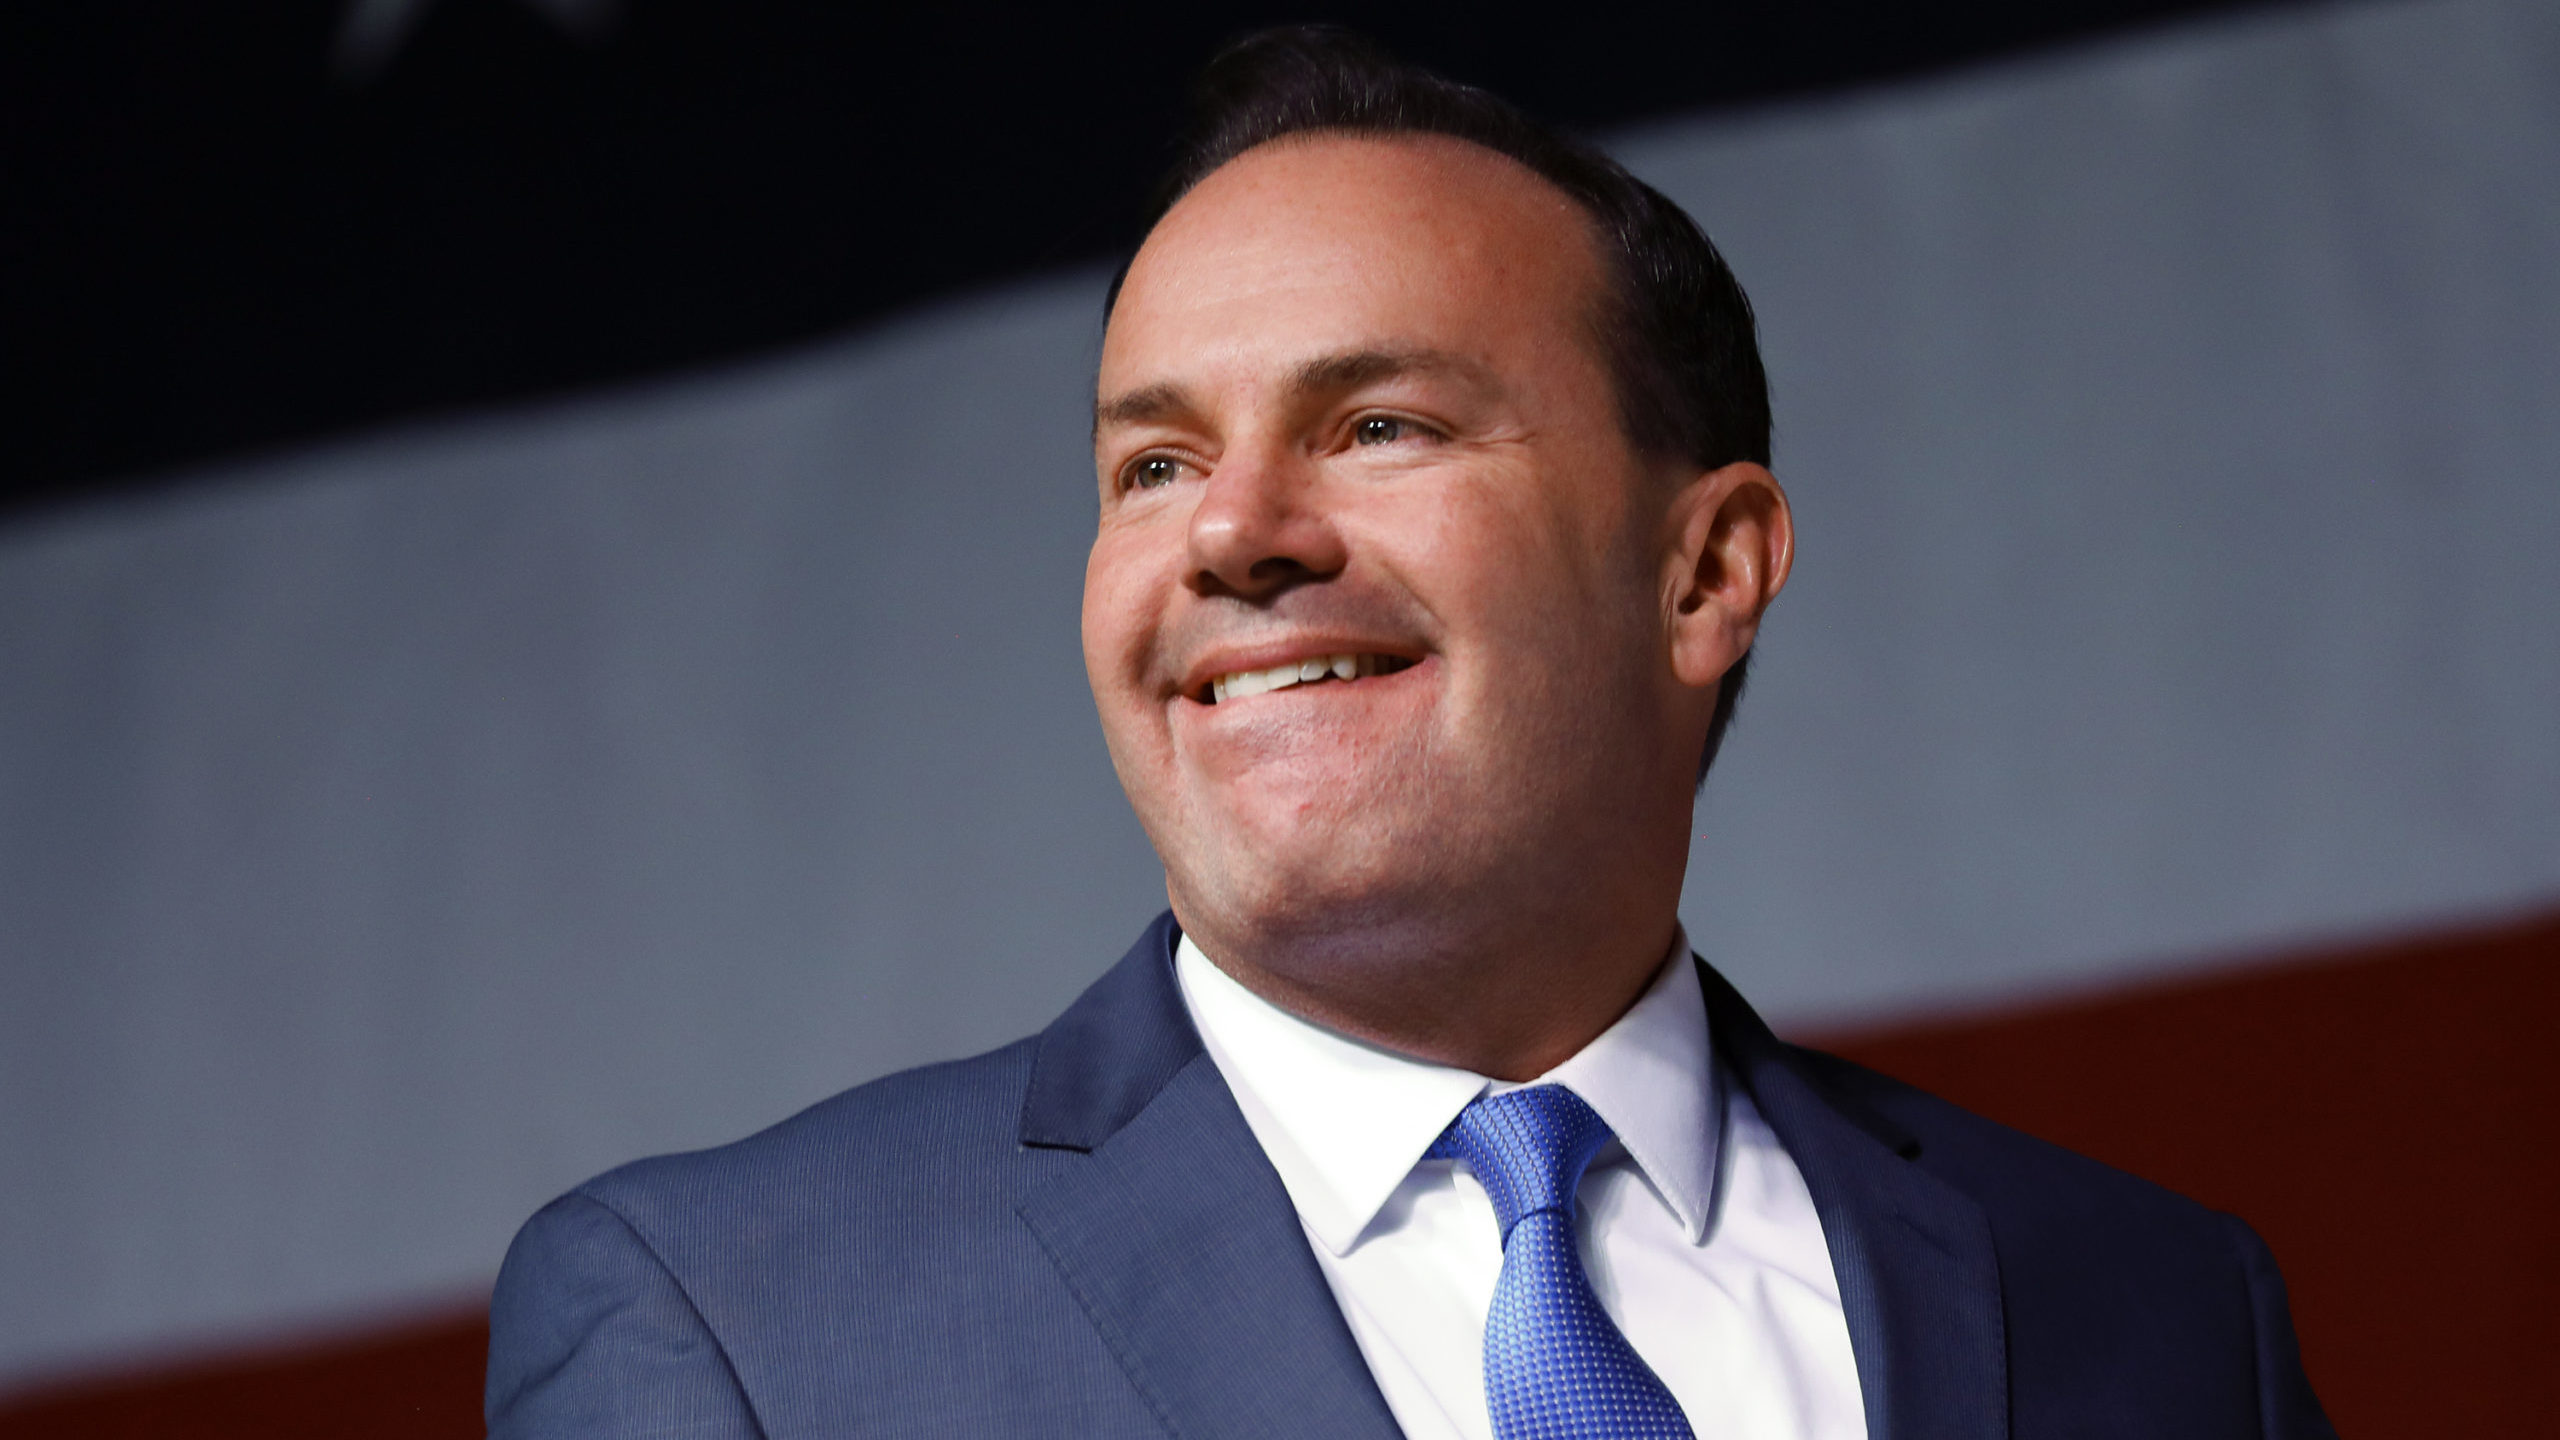 Sen. Mike Lee will go to a primary election, but face no Democrat opponent....